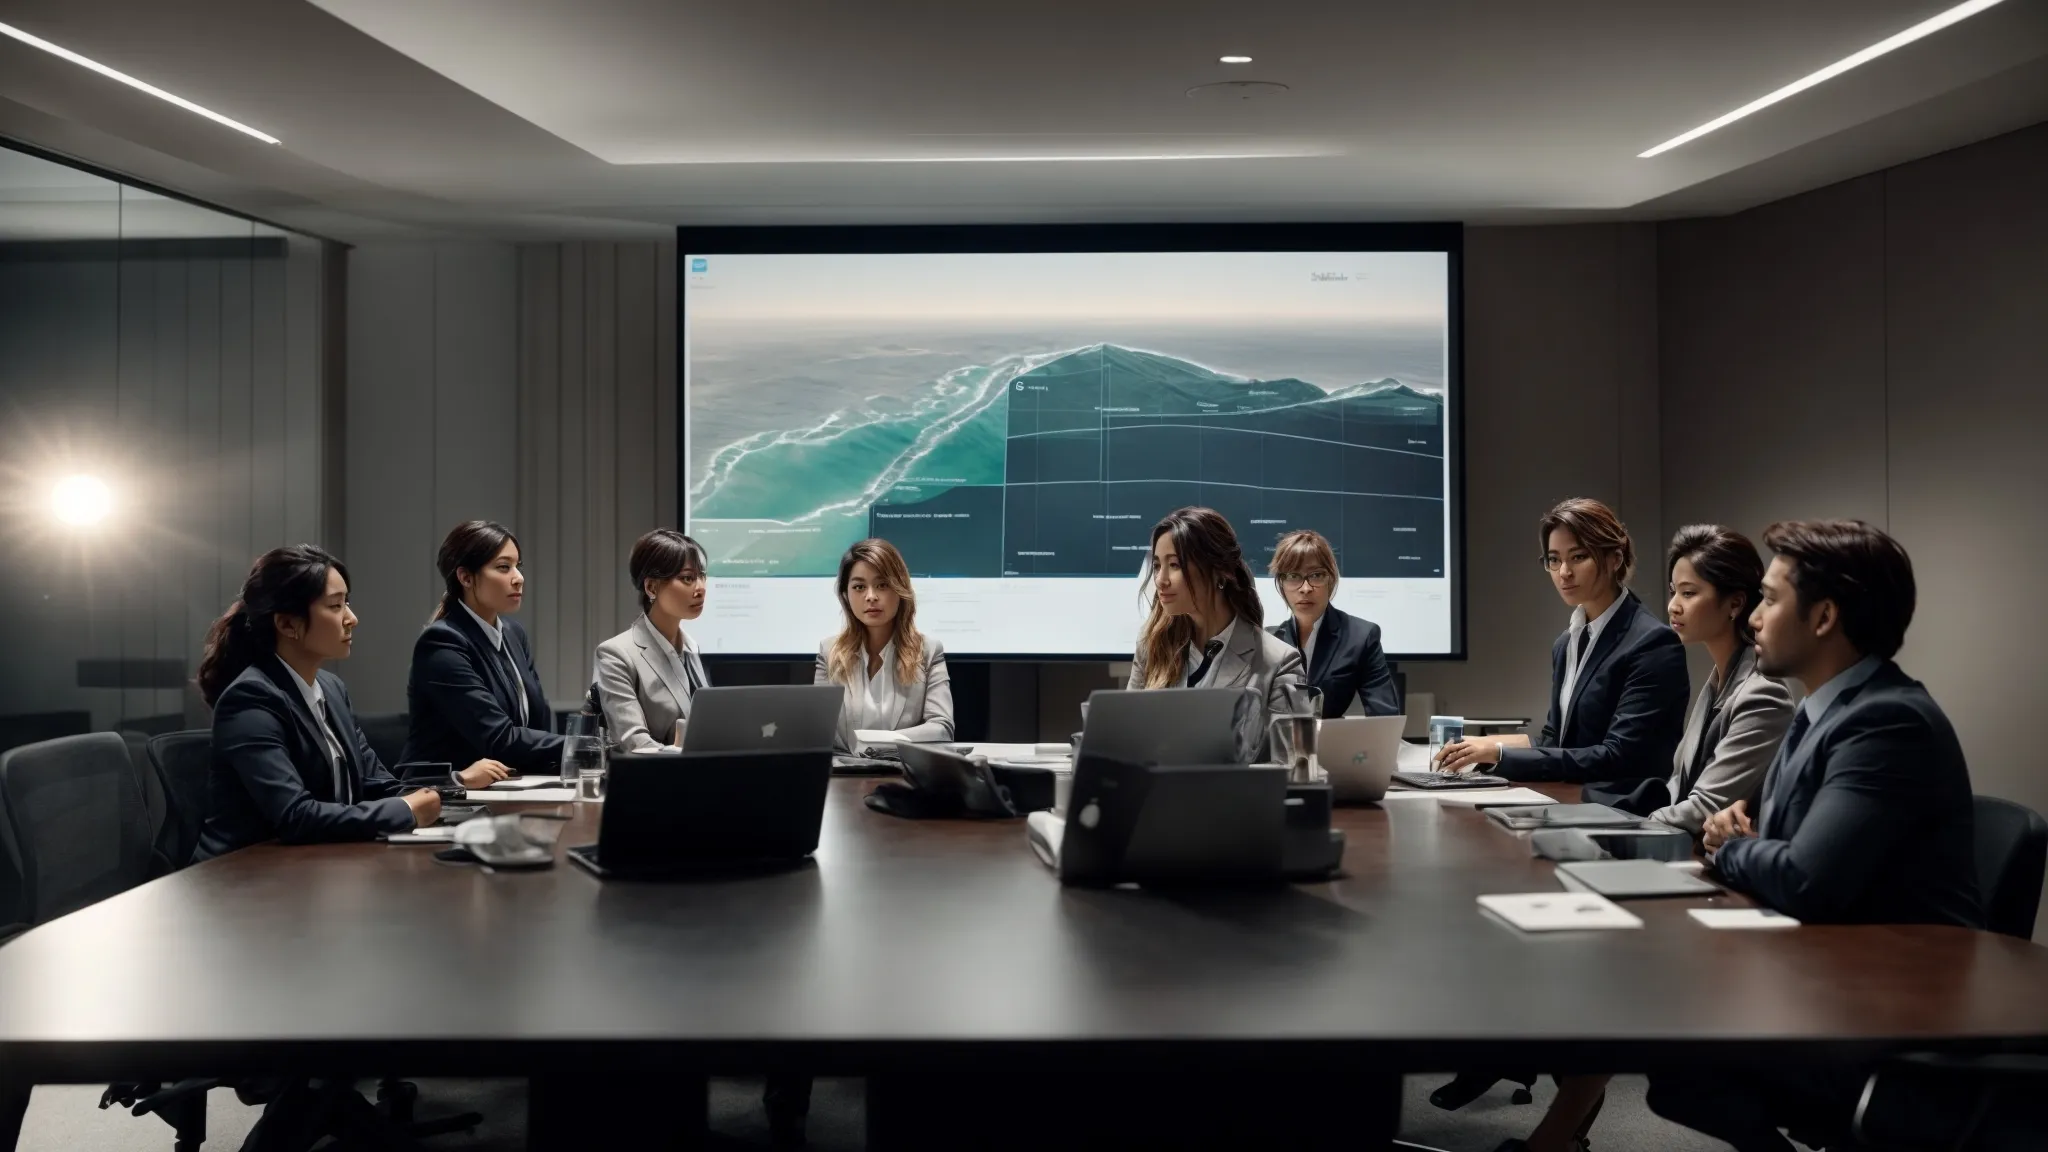 a team of professionals, gathered around a conference table with a laptop, discusses strategies highlighted on a screen displaying regional analytics.